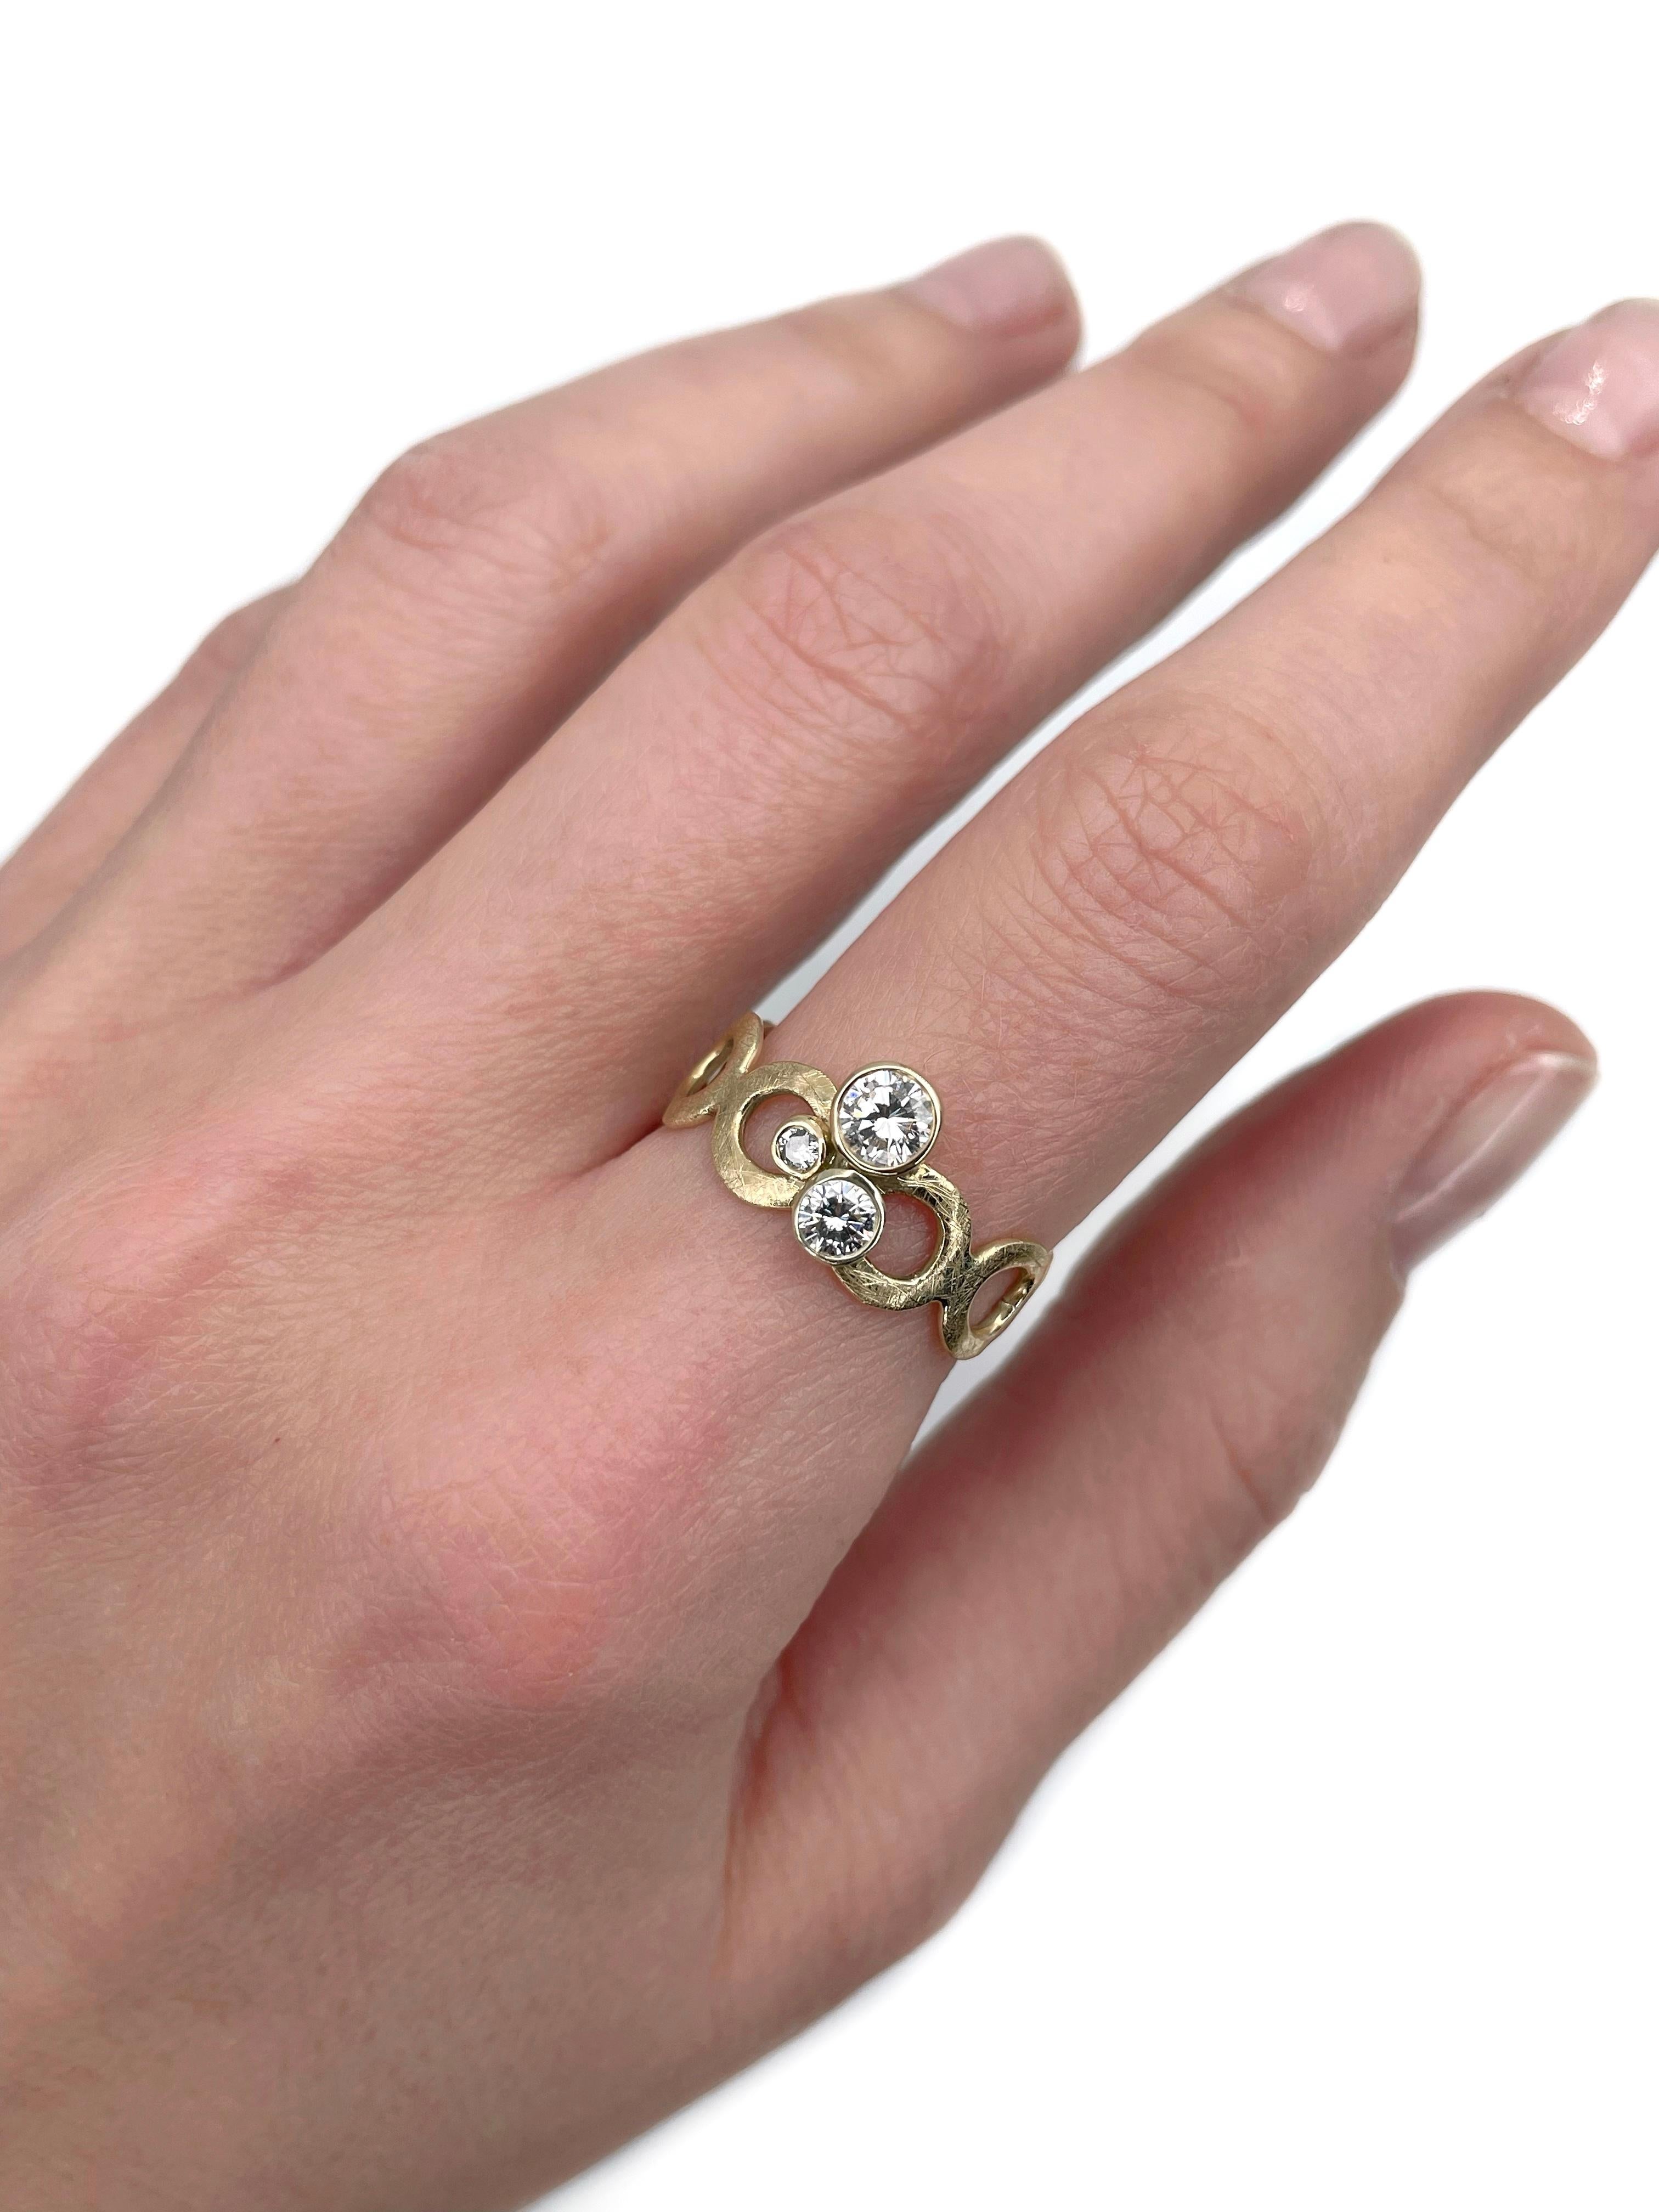 This is a modern design ring crafted in 14K yellow gold. Circa 2000. 

It features diamonds (TW 0.52ct):
- 1 diamond (round brilliant cut, 0.30ct, RW-W, VVS-VS)
- 2 diamonds (round brilliant cut, TW 0.22ct, RW-W, VVS-VS)

Weight: 3.21g
Size: 18.25